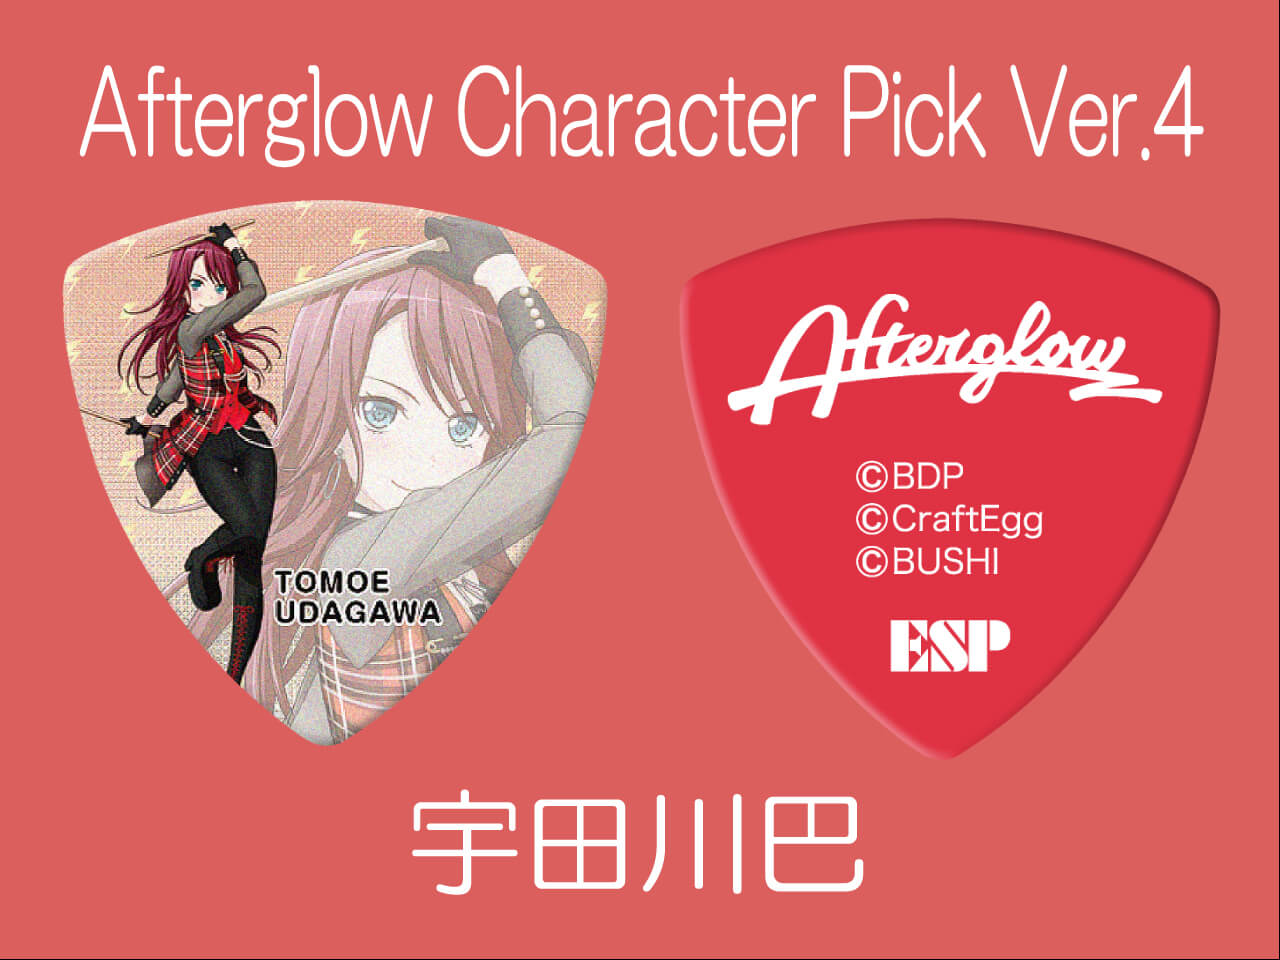 【ESP×BanG Dream!コラボピック】Afterglow Character Pick Ver.4 "宇田川巴"（GBP TOMOE AFTERGLOW 4）＆”ハメパチ” セット